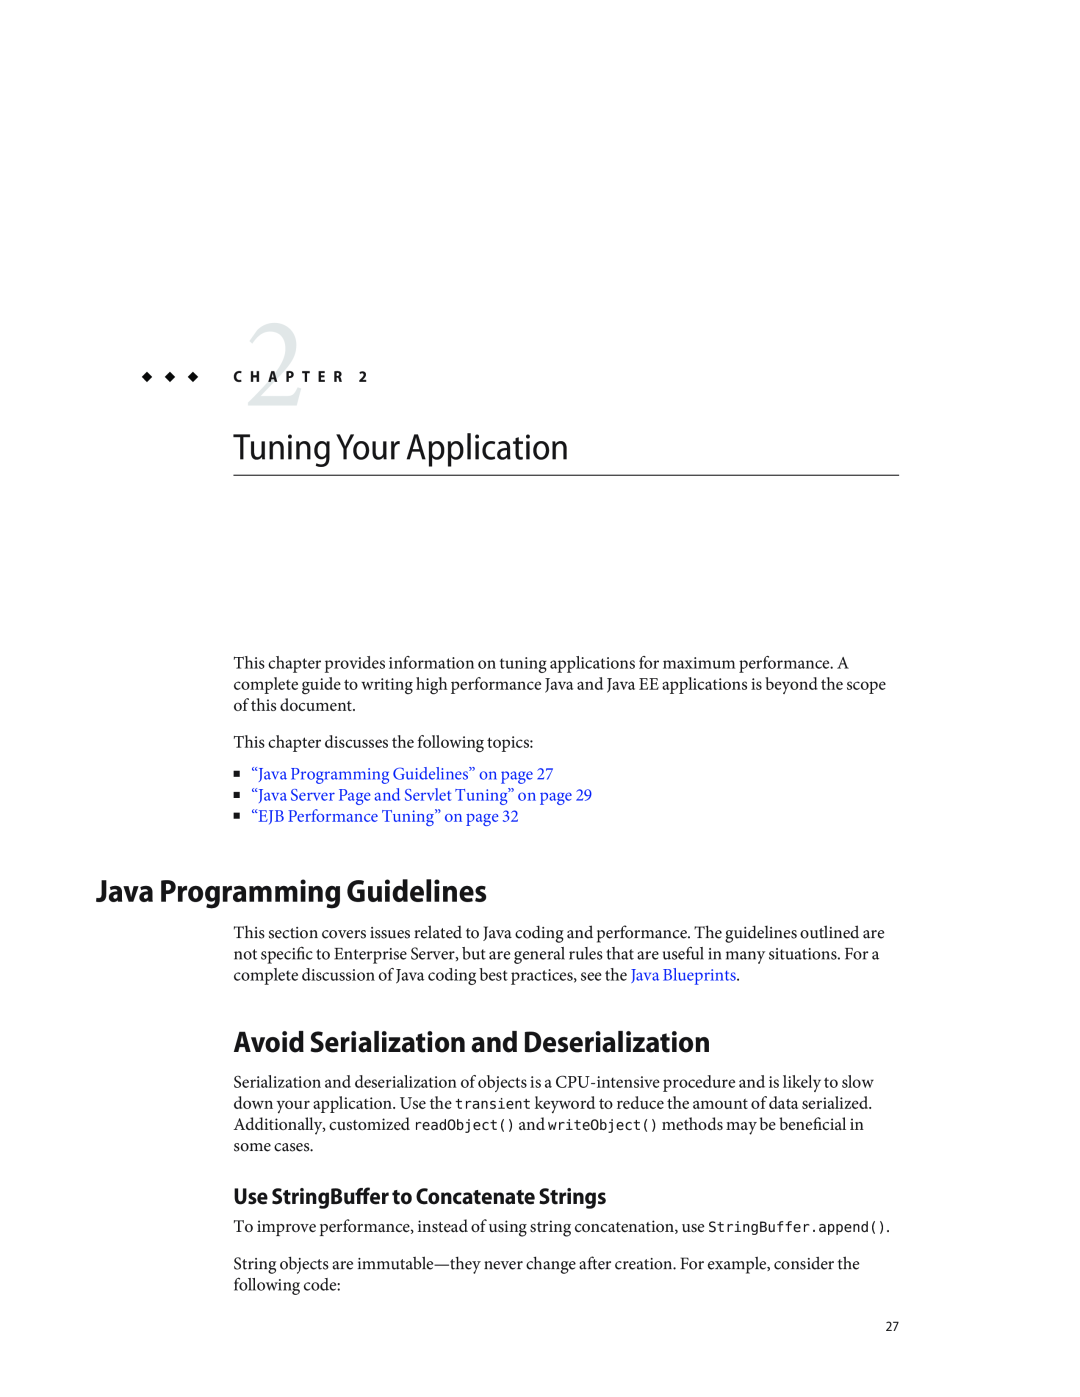 Sun Microsystems 820434310 Tuning Your Application, Java Programming Guidelines, Avoid Serialization and Deserialization 